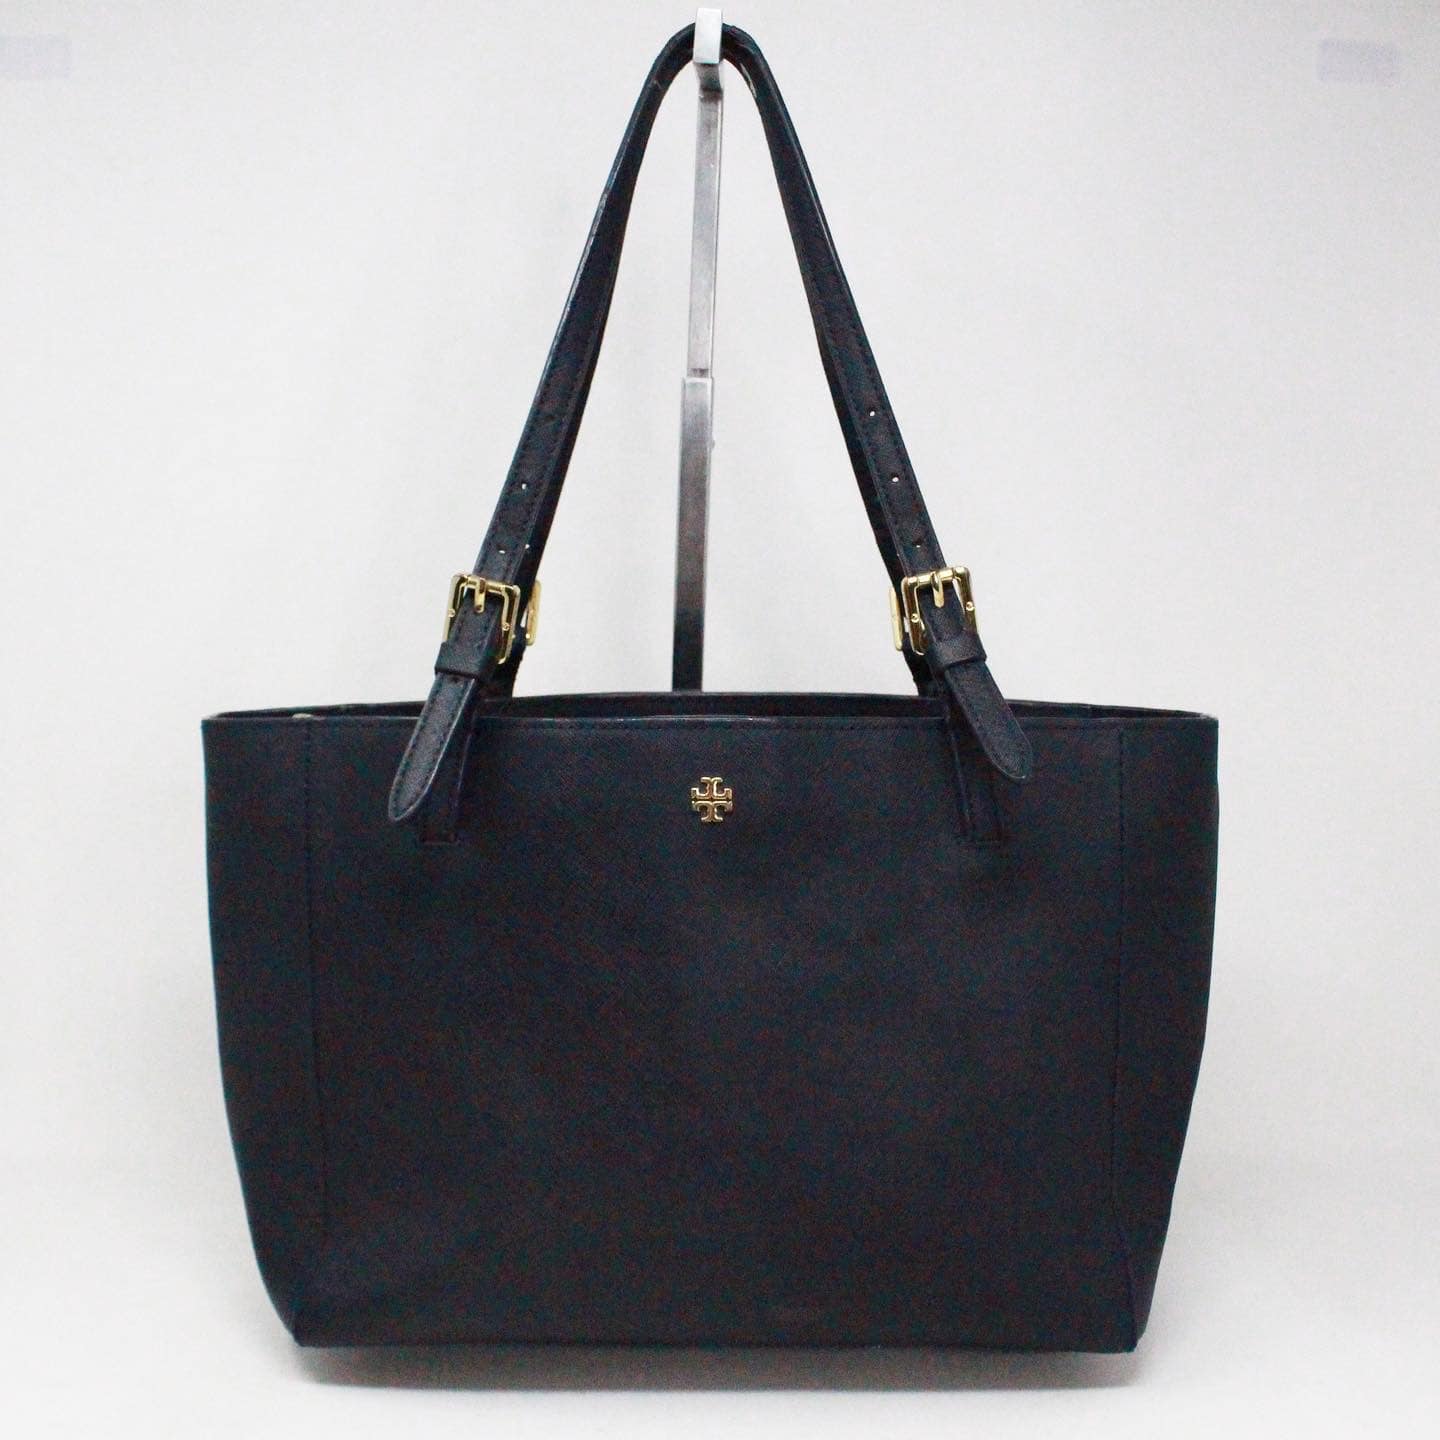 TORY BURCH 38458 Navy Blue Saffiano Leather Small Tote Bag A